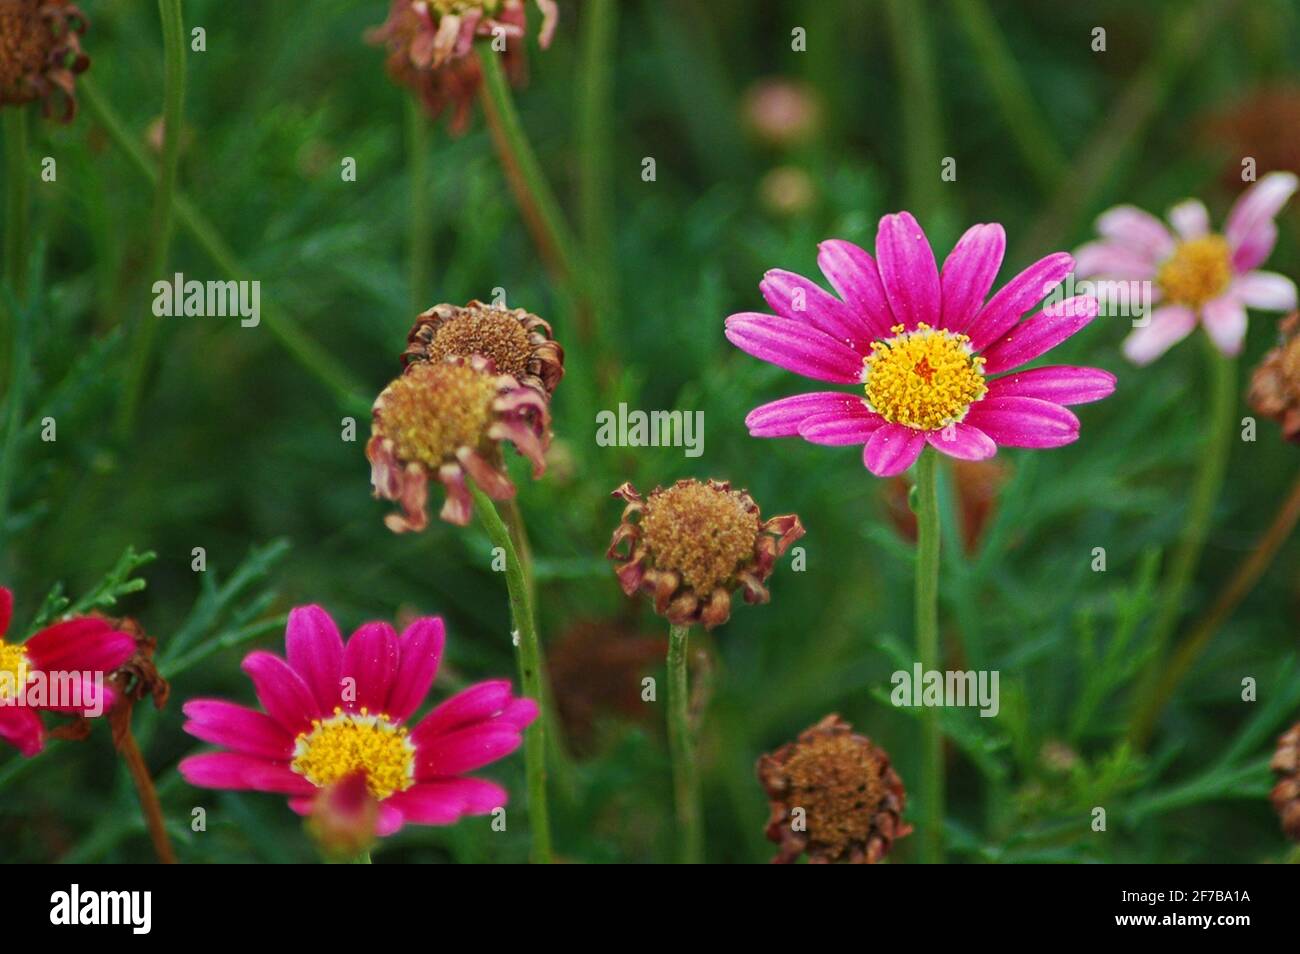 Argyranthemum frutescens cultivar or marguerite daisies in the garden, delicate little cyclamen or pink and yellow perennial flowers Stock Photo